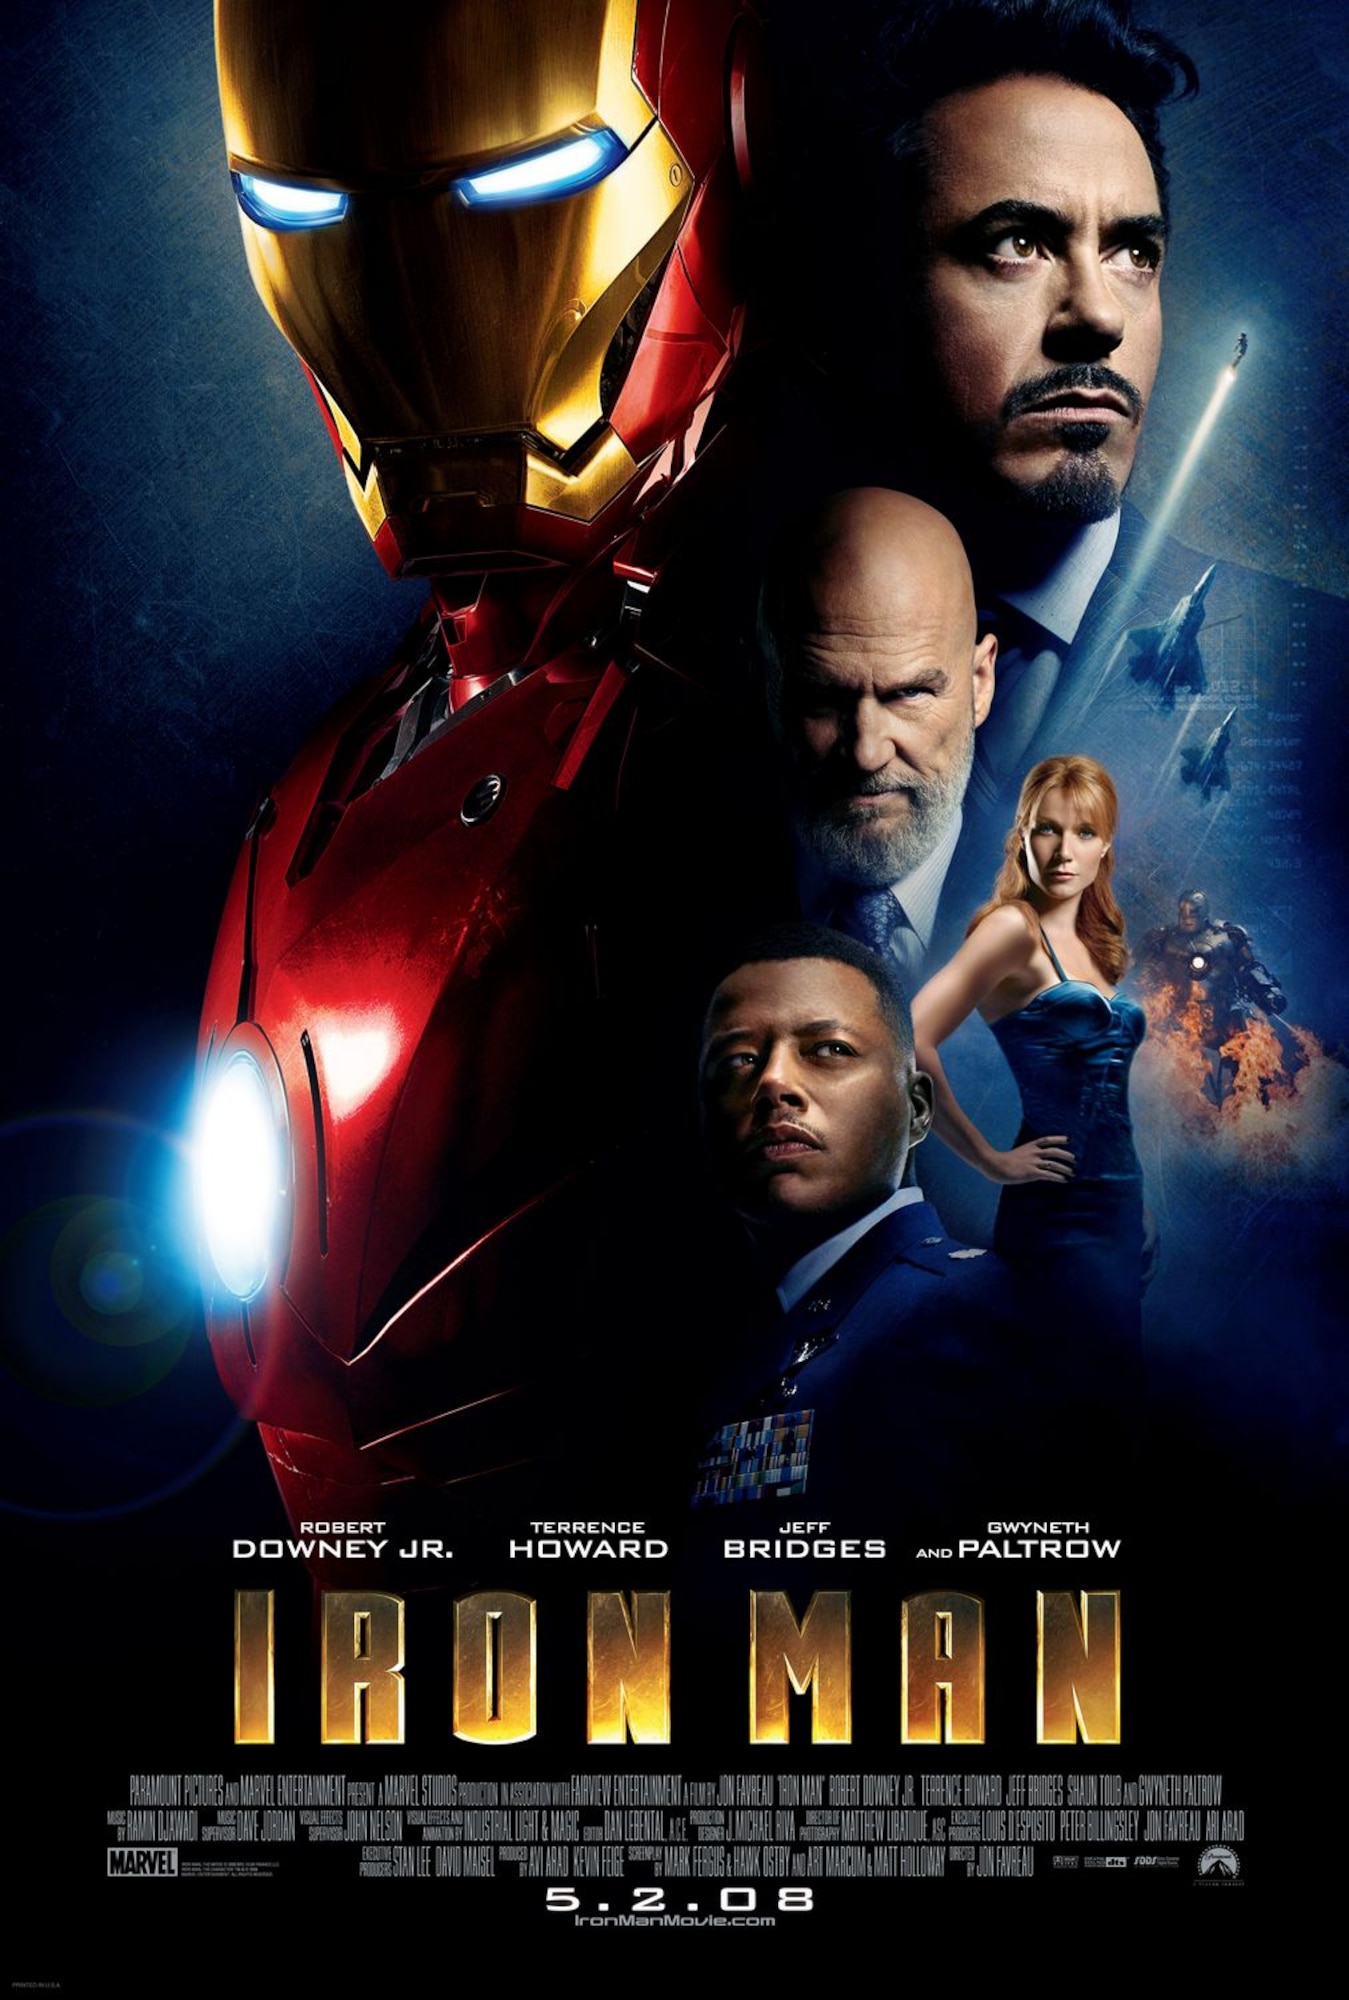 The Air Force Museum Theatre will show "Iron Man" at 4 p.m. on April 26, 2015, as part of its Hollywood Series, sponsored by Cassano's Pizza King.